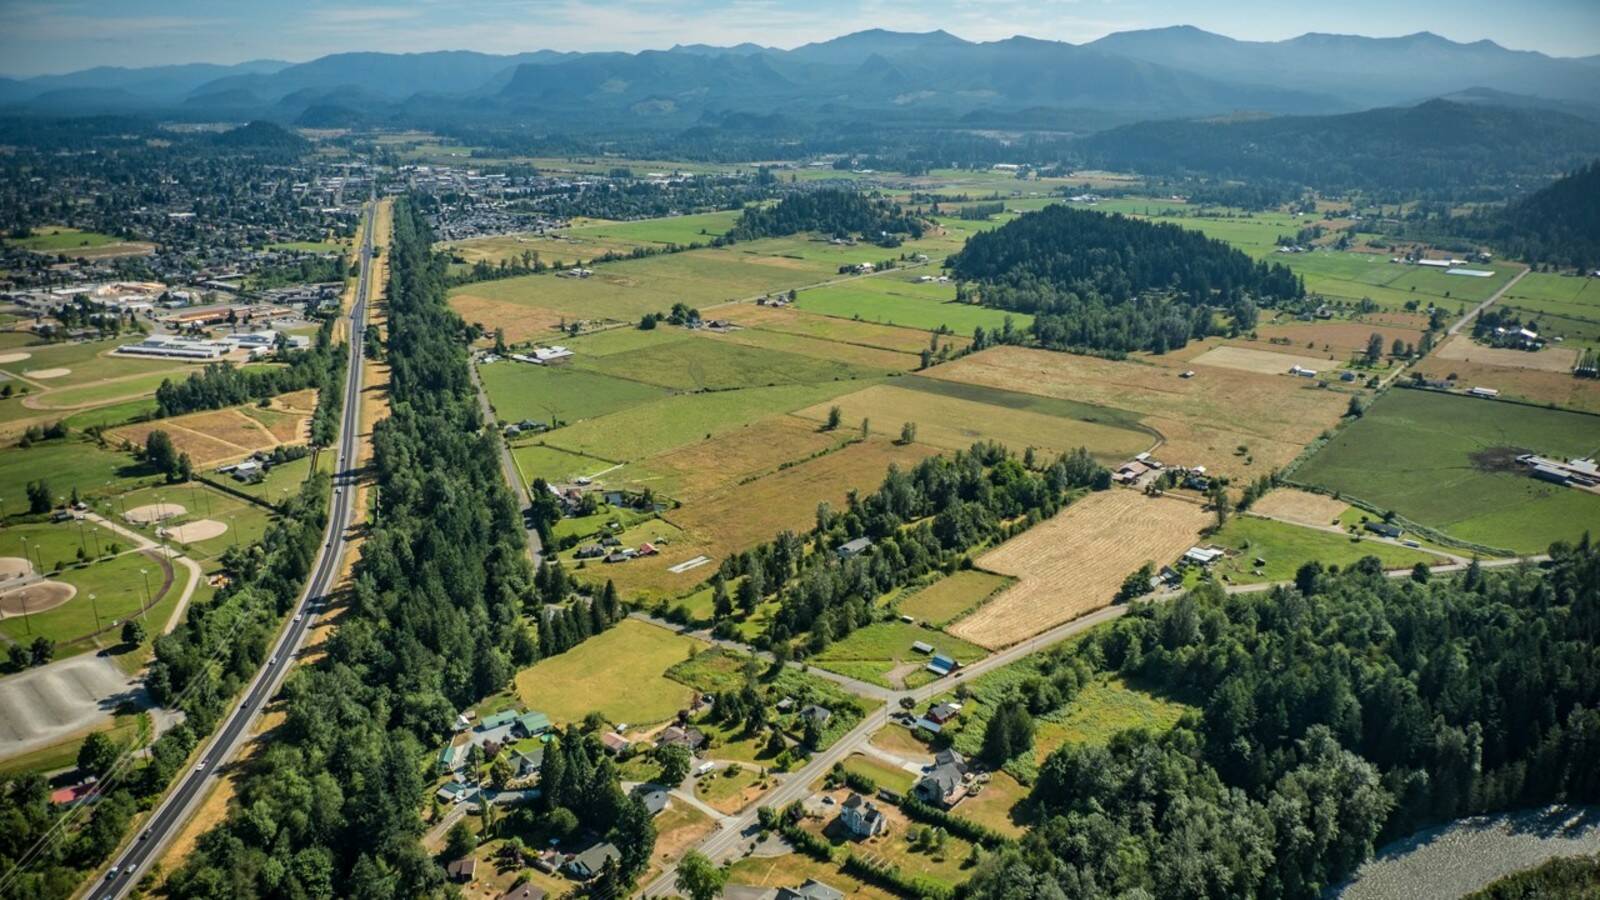 Courtesy photo
An aerial shot of farm land in the Snoqualmie Valley.